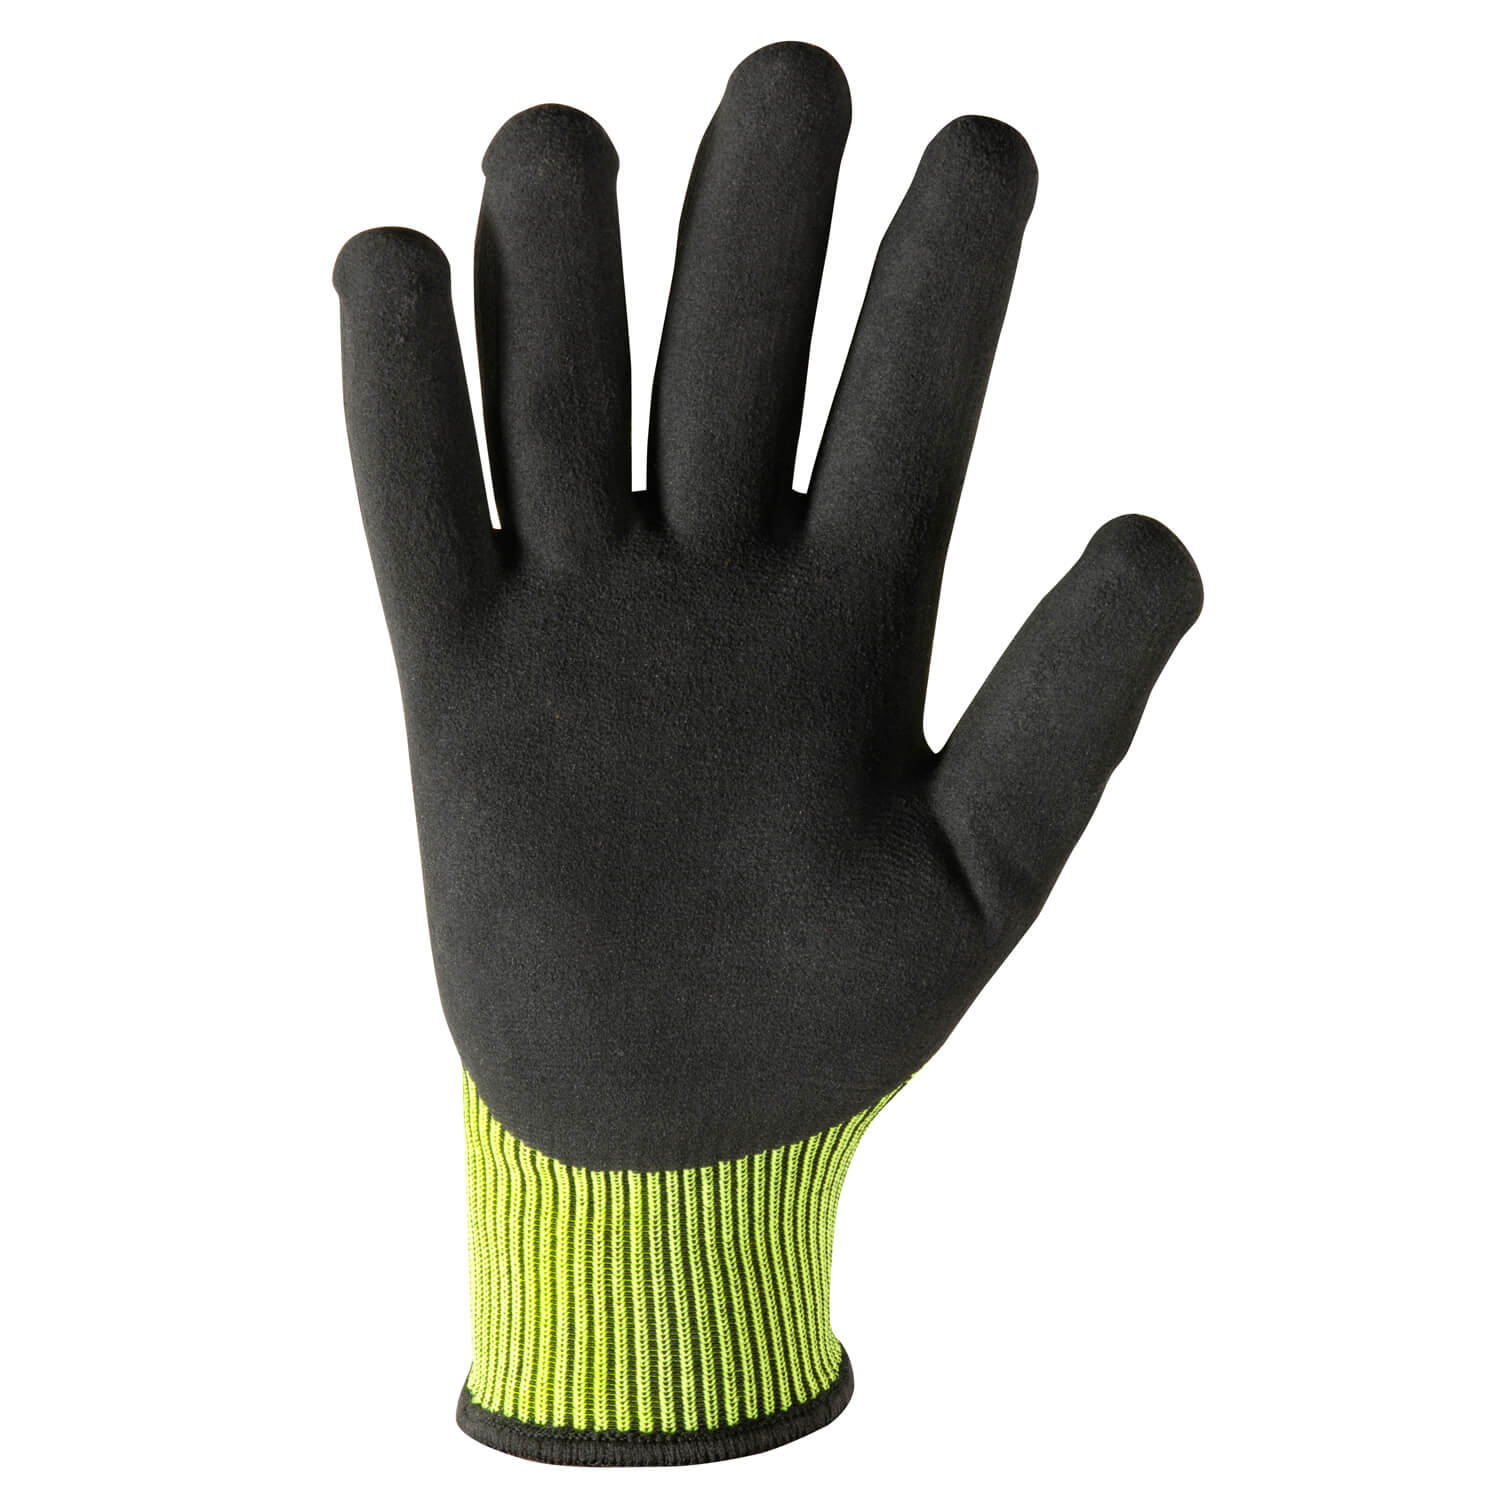 Impact Protection Coated Grip Work Gloves | Wells Lamont